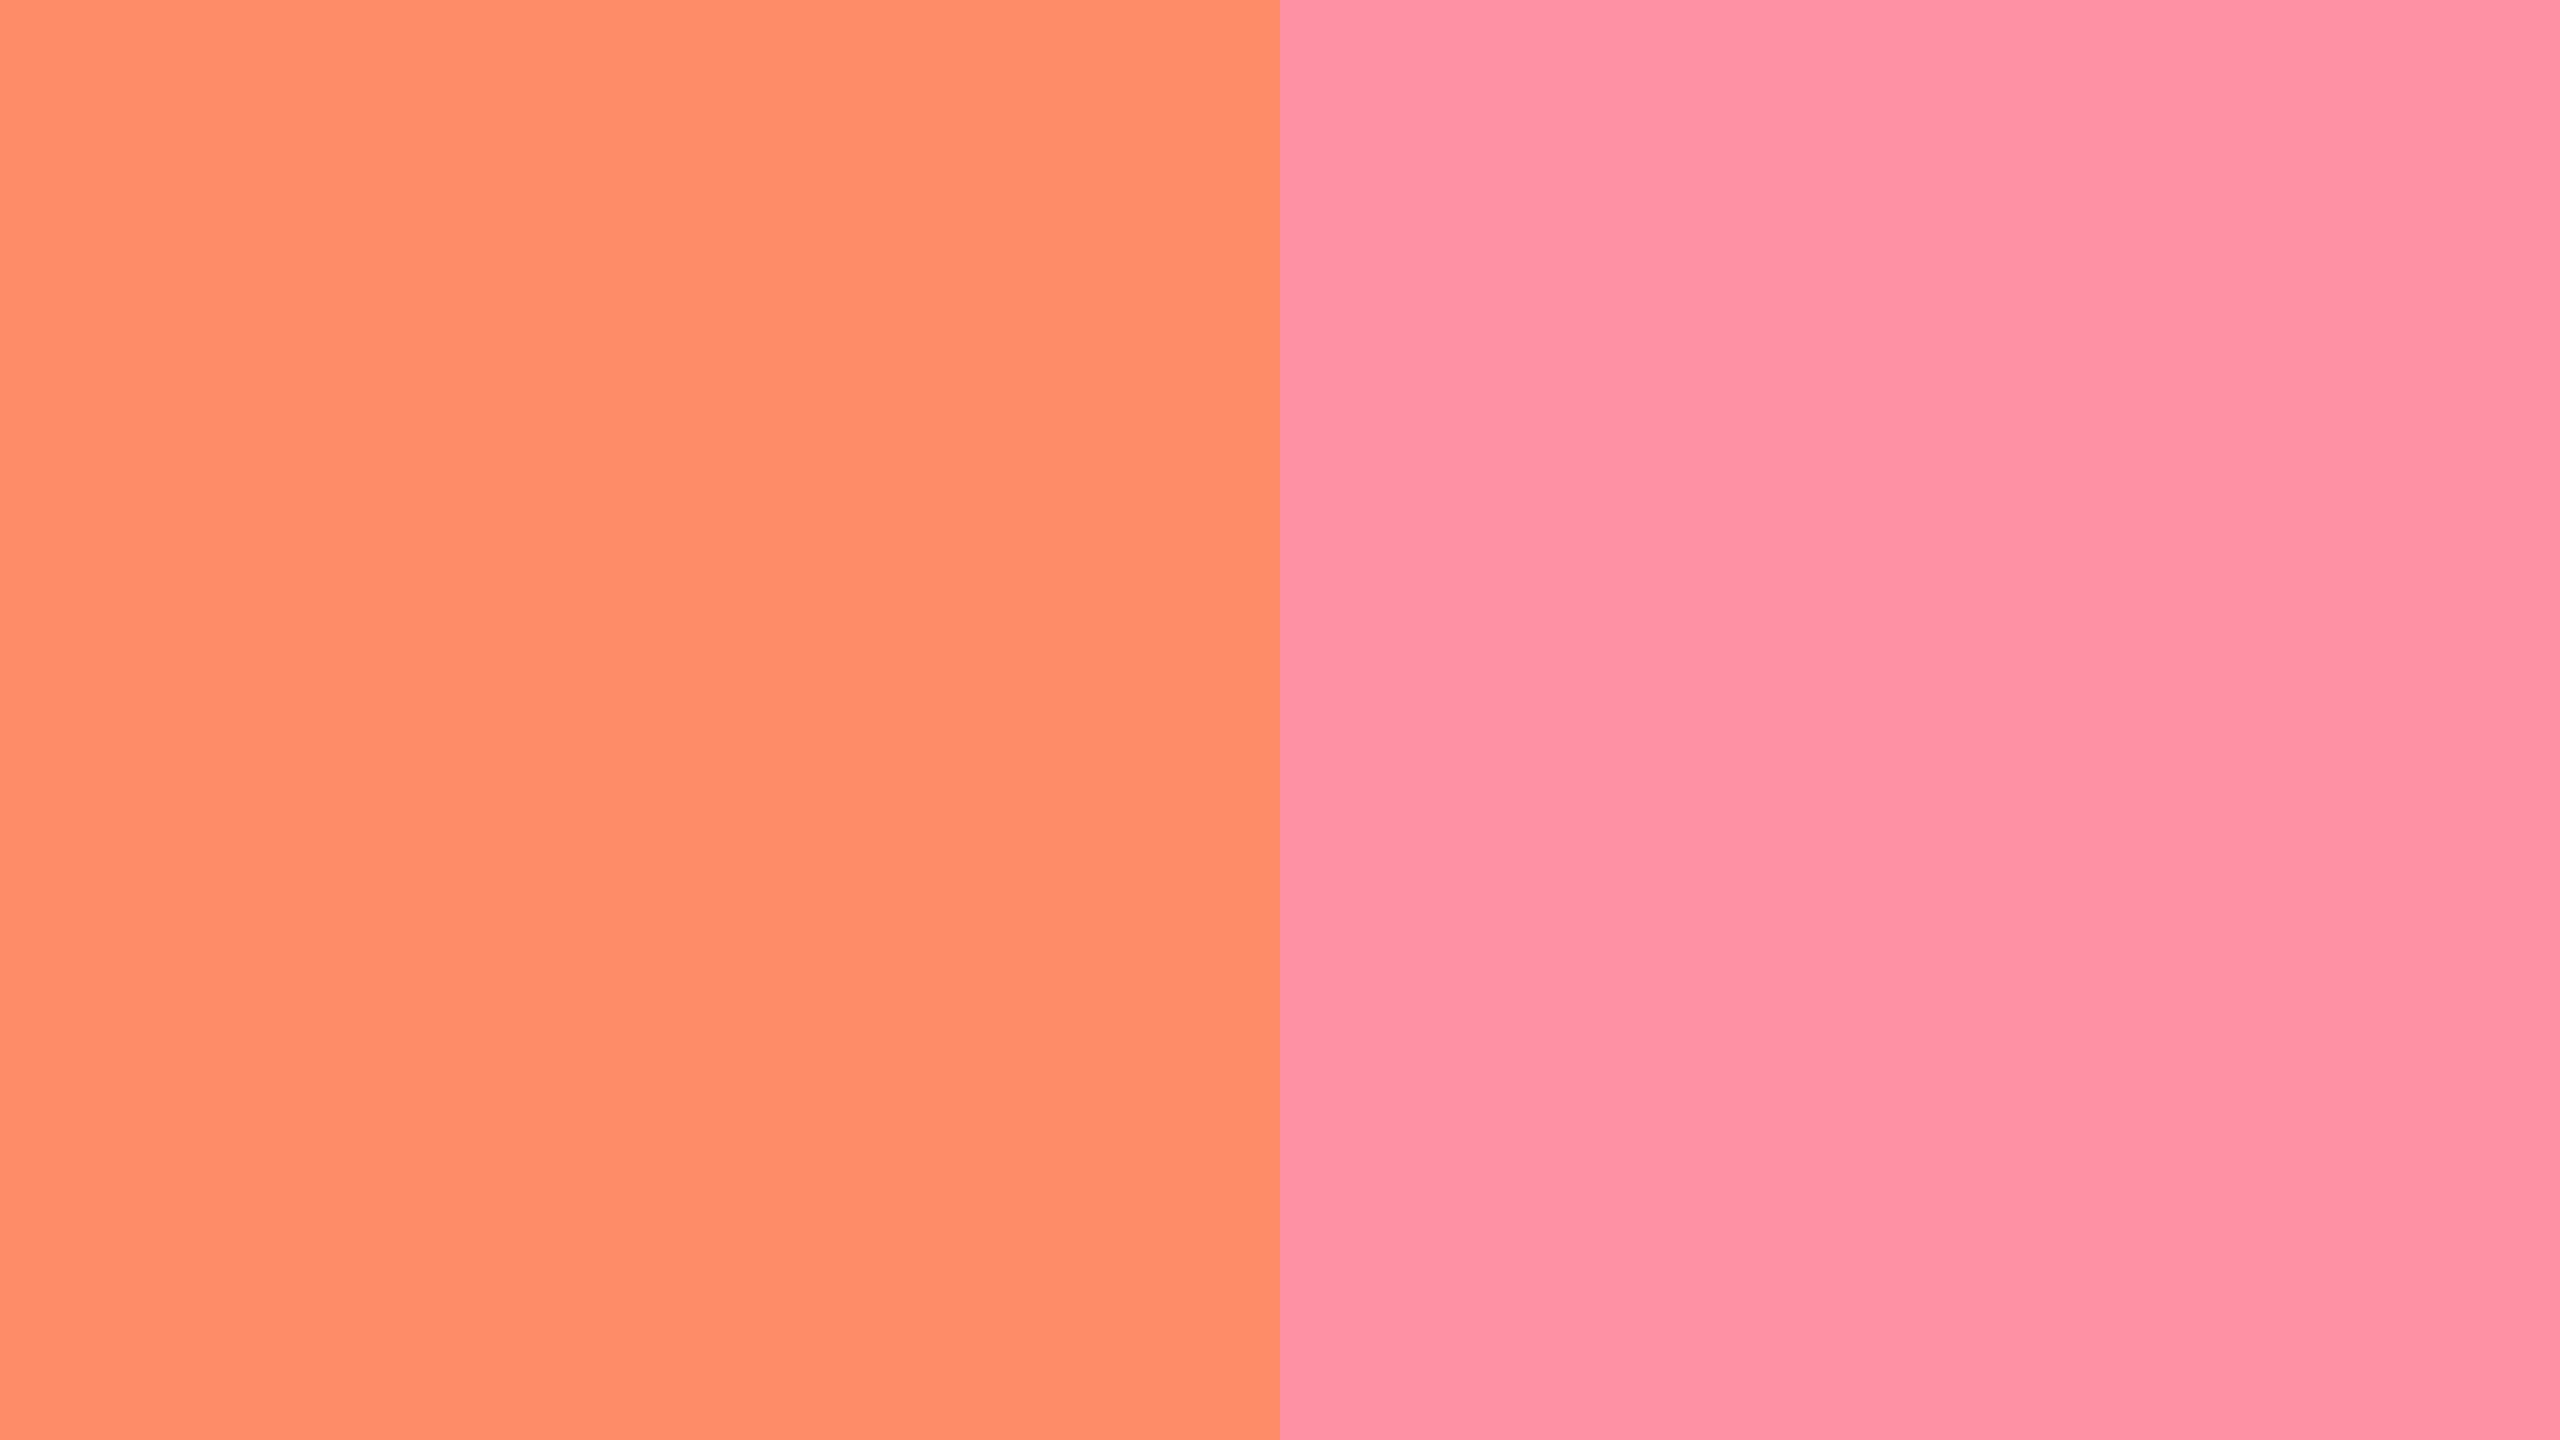 Free download 2560x1440 resolution Salmon and Salmon Pink solid two color  background [2560x1440] for your Desktop, Mobile & Tablet | Explore 47+  Salmon Colored Wallpaper | Colored Backgrounds, Colored Smoke Wallpaper,  Colored Wallpapers